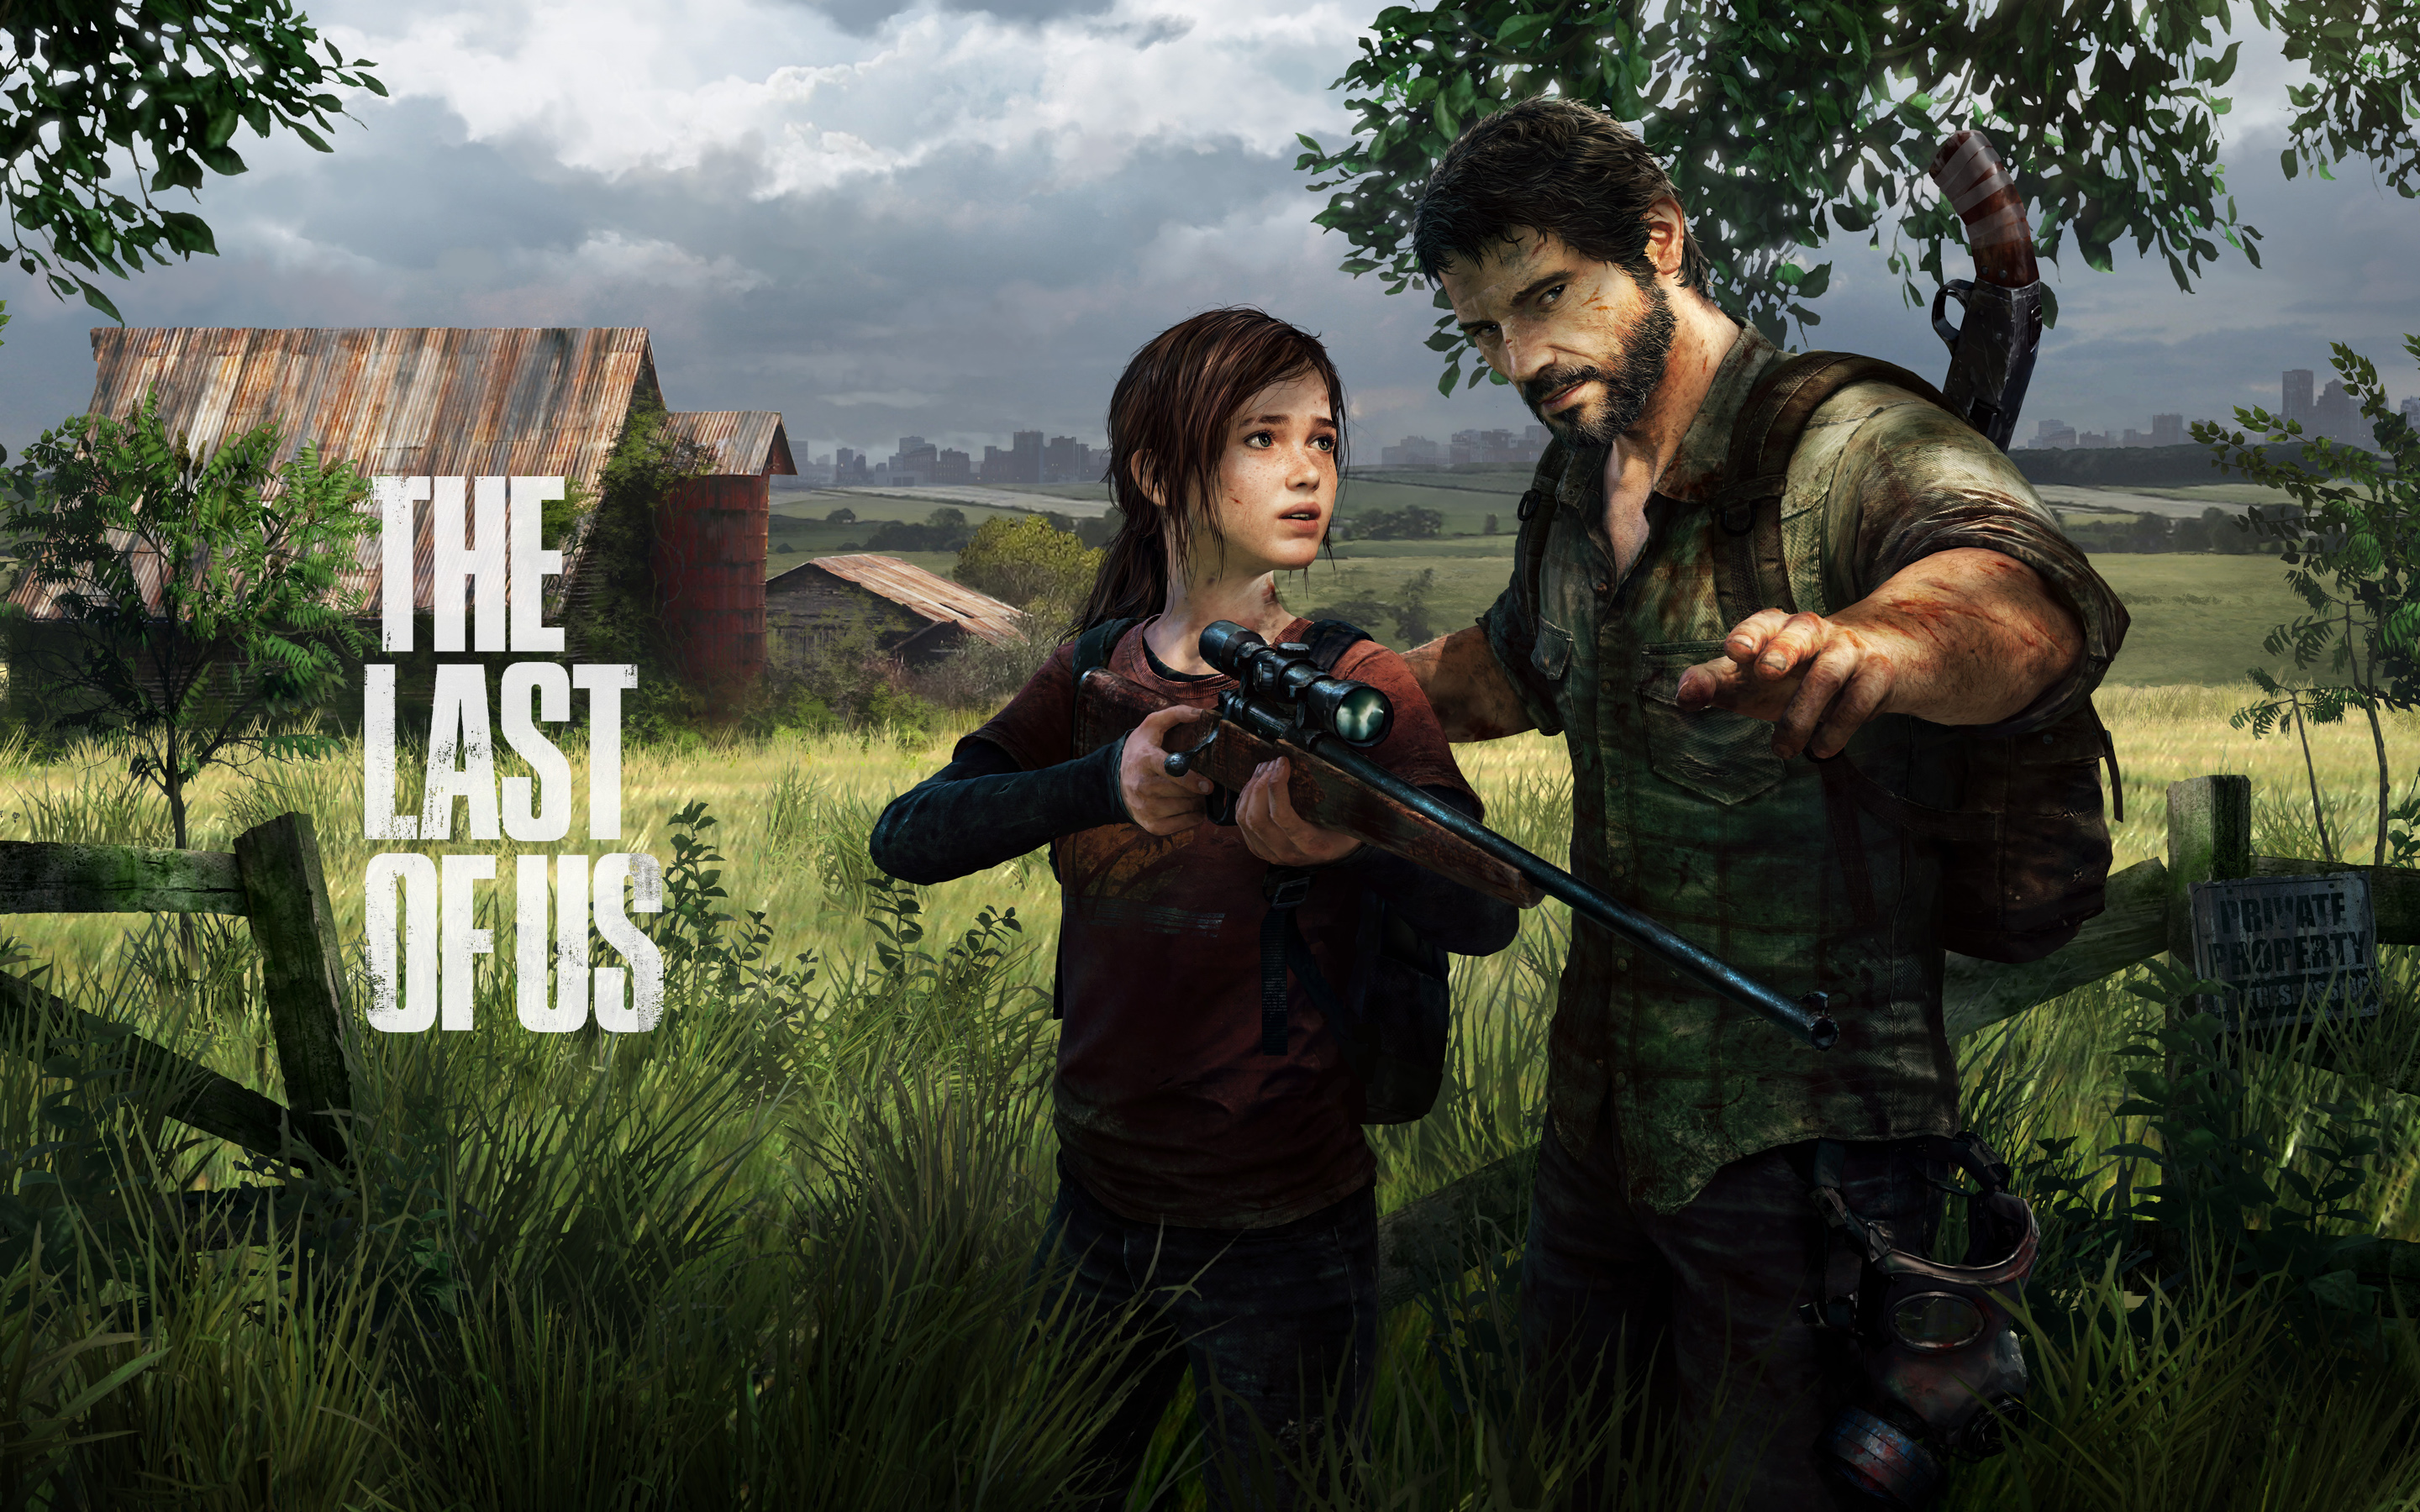 13. The Last of Us